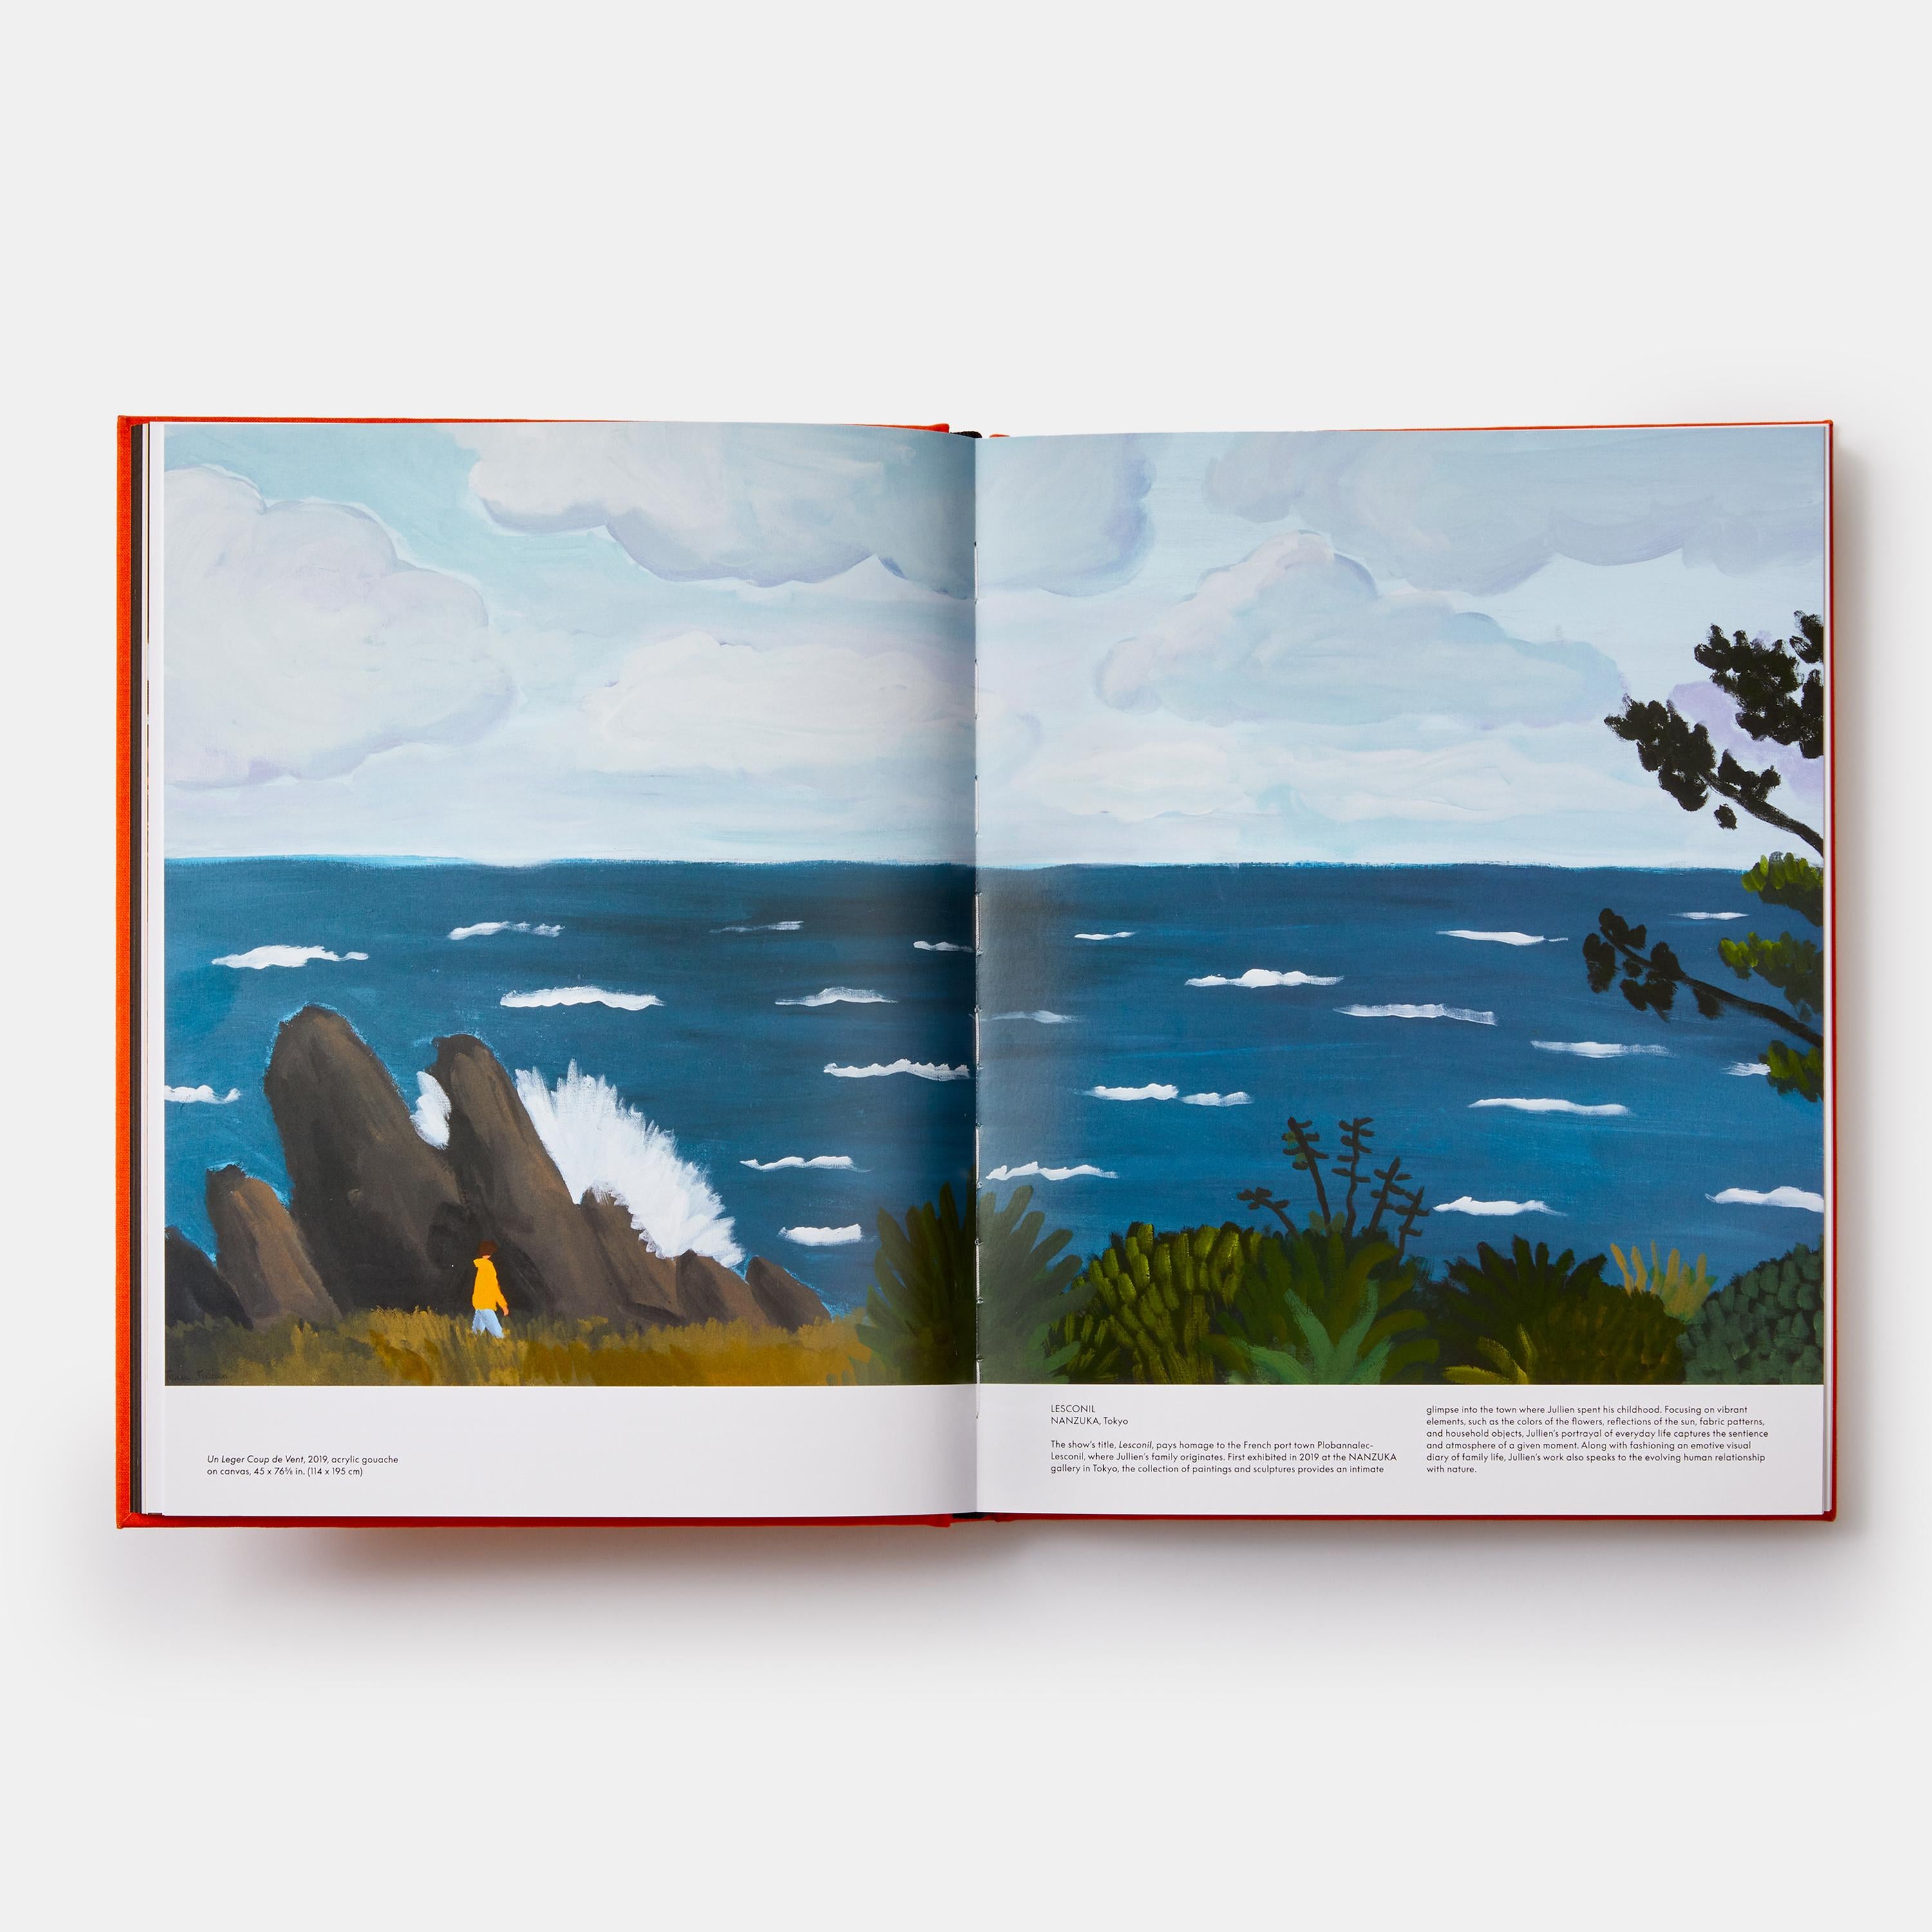 The debut monograph on the globally-lauded artist, filled with his joyful, witty paintings, illustrations, collaborations, and more – includes never-before-seen artwork and personal sketchbooks, giving insight into his artistic practice

Jean